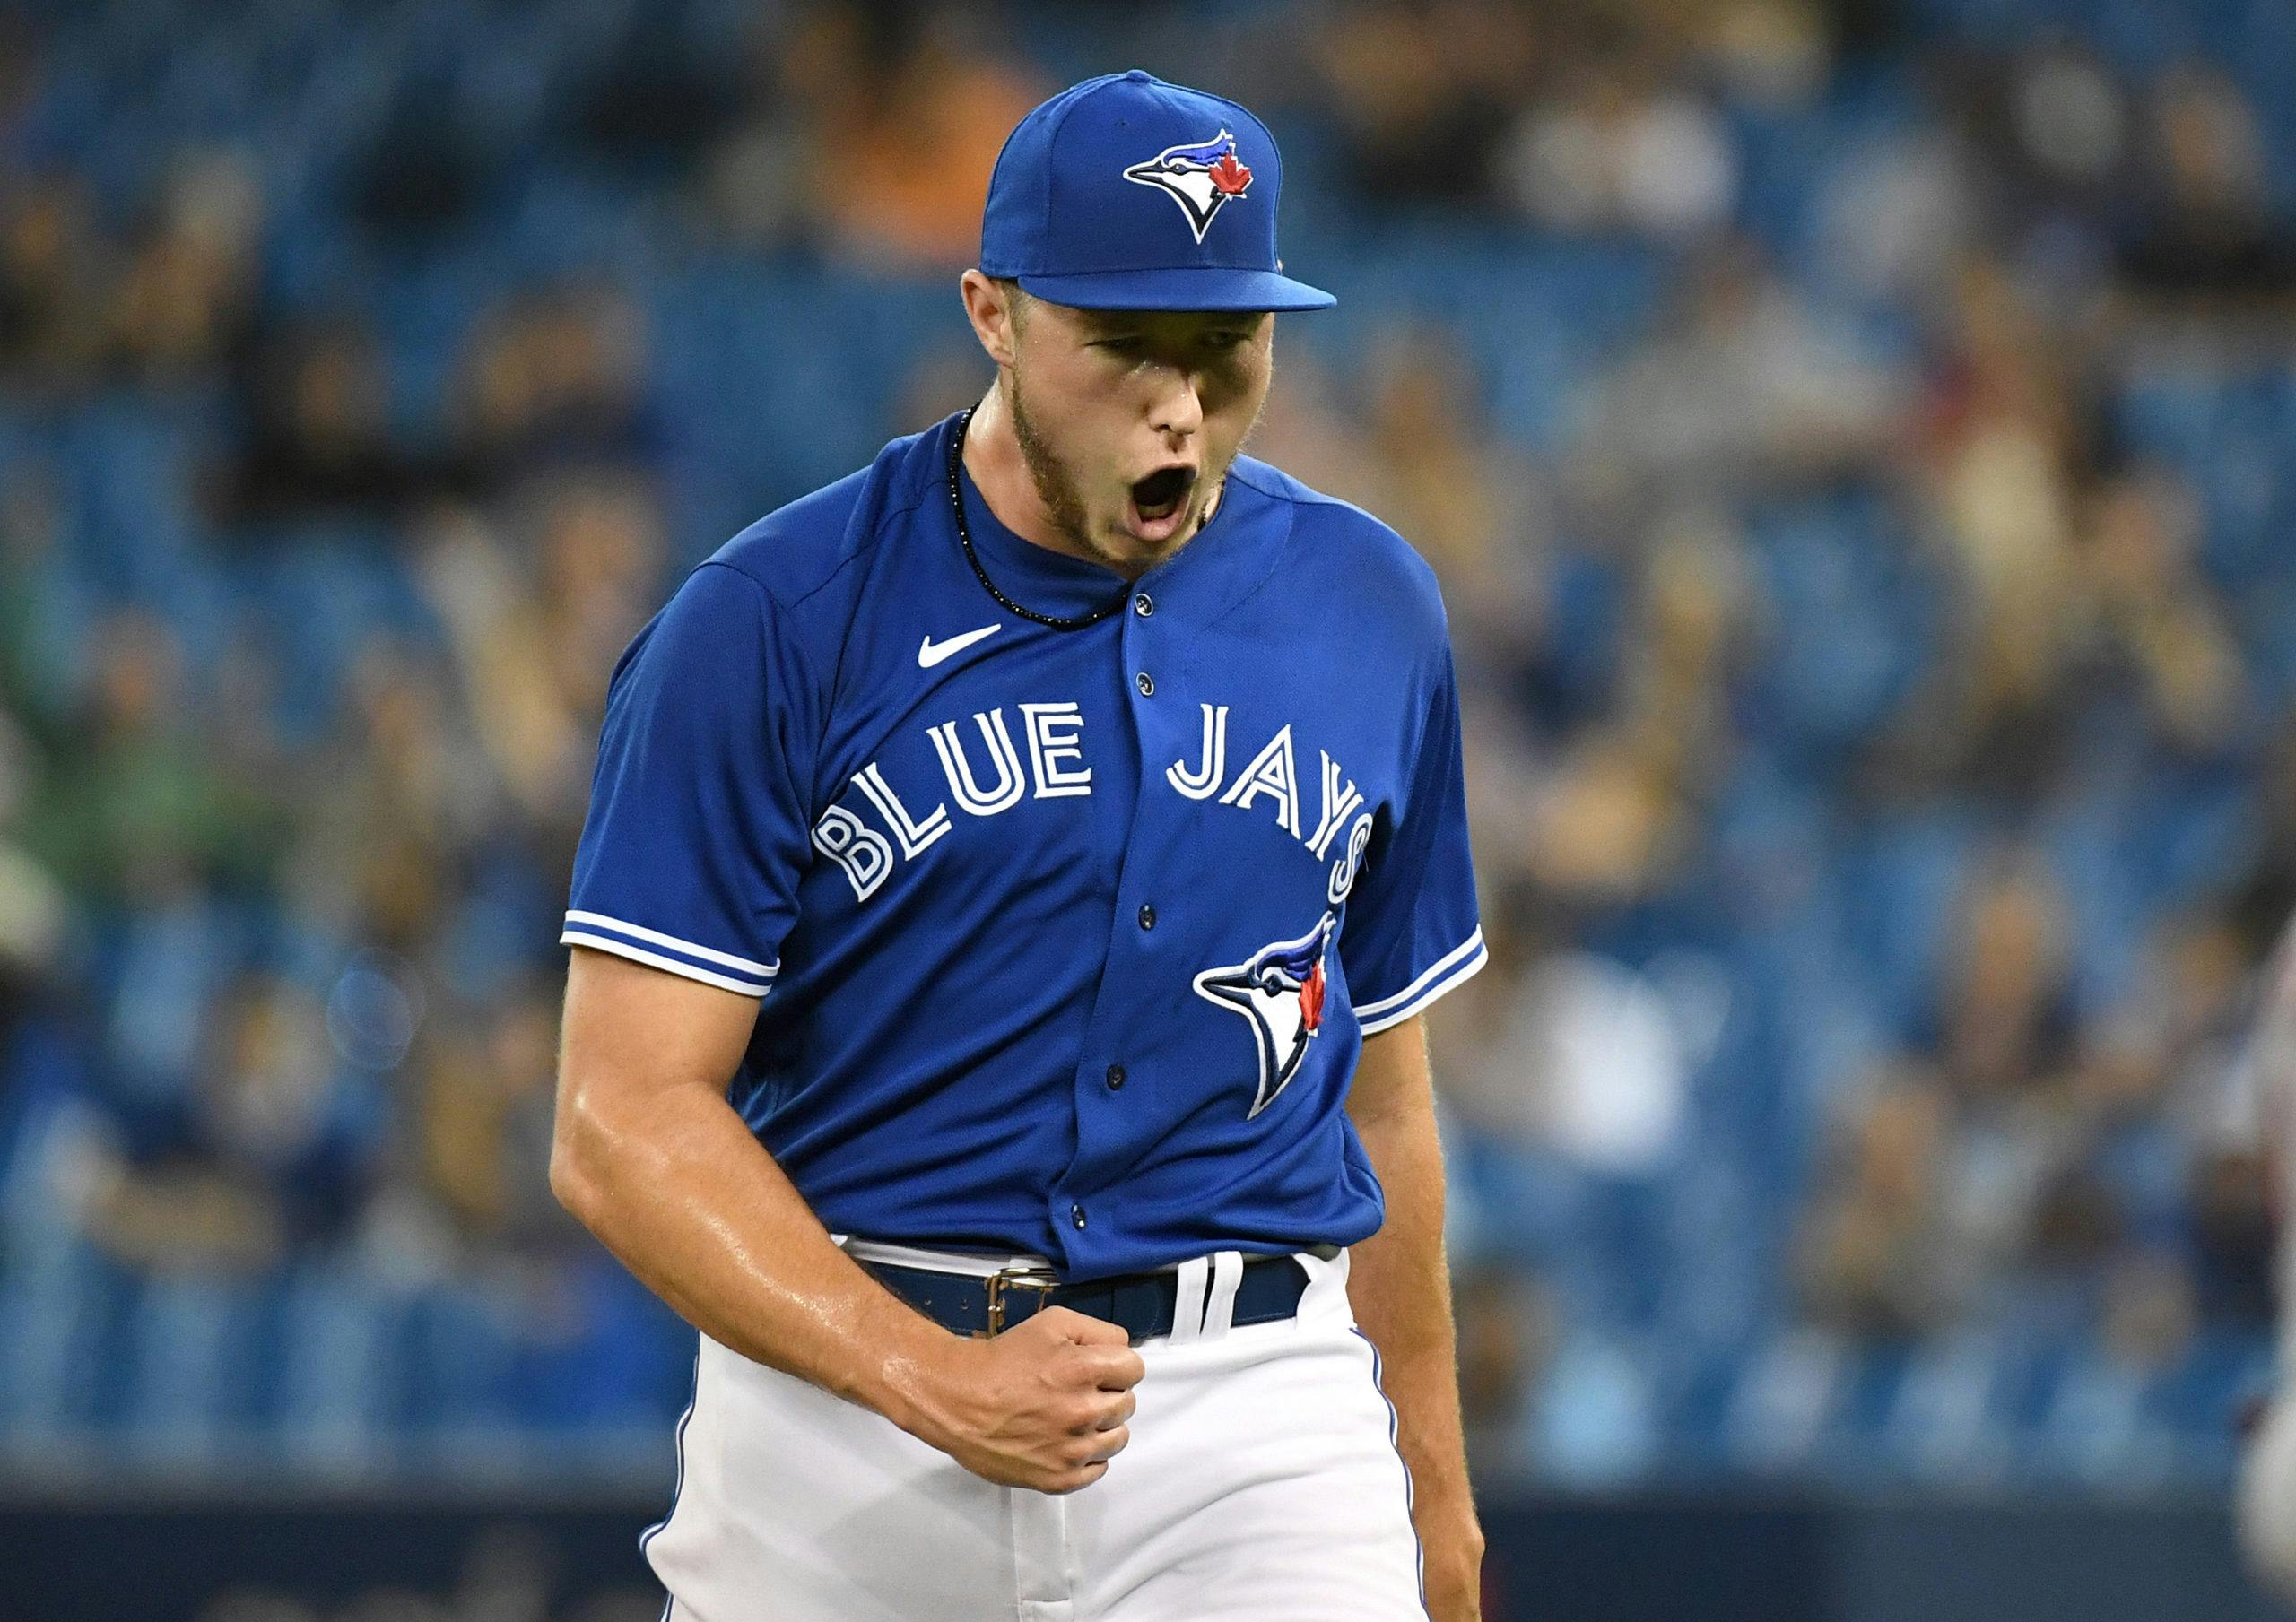 Nate Pearson could finally shine for the Blue Jays pitching out of the  bullpen - BlueJaysNation